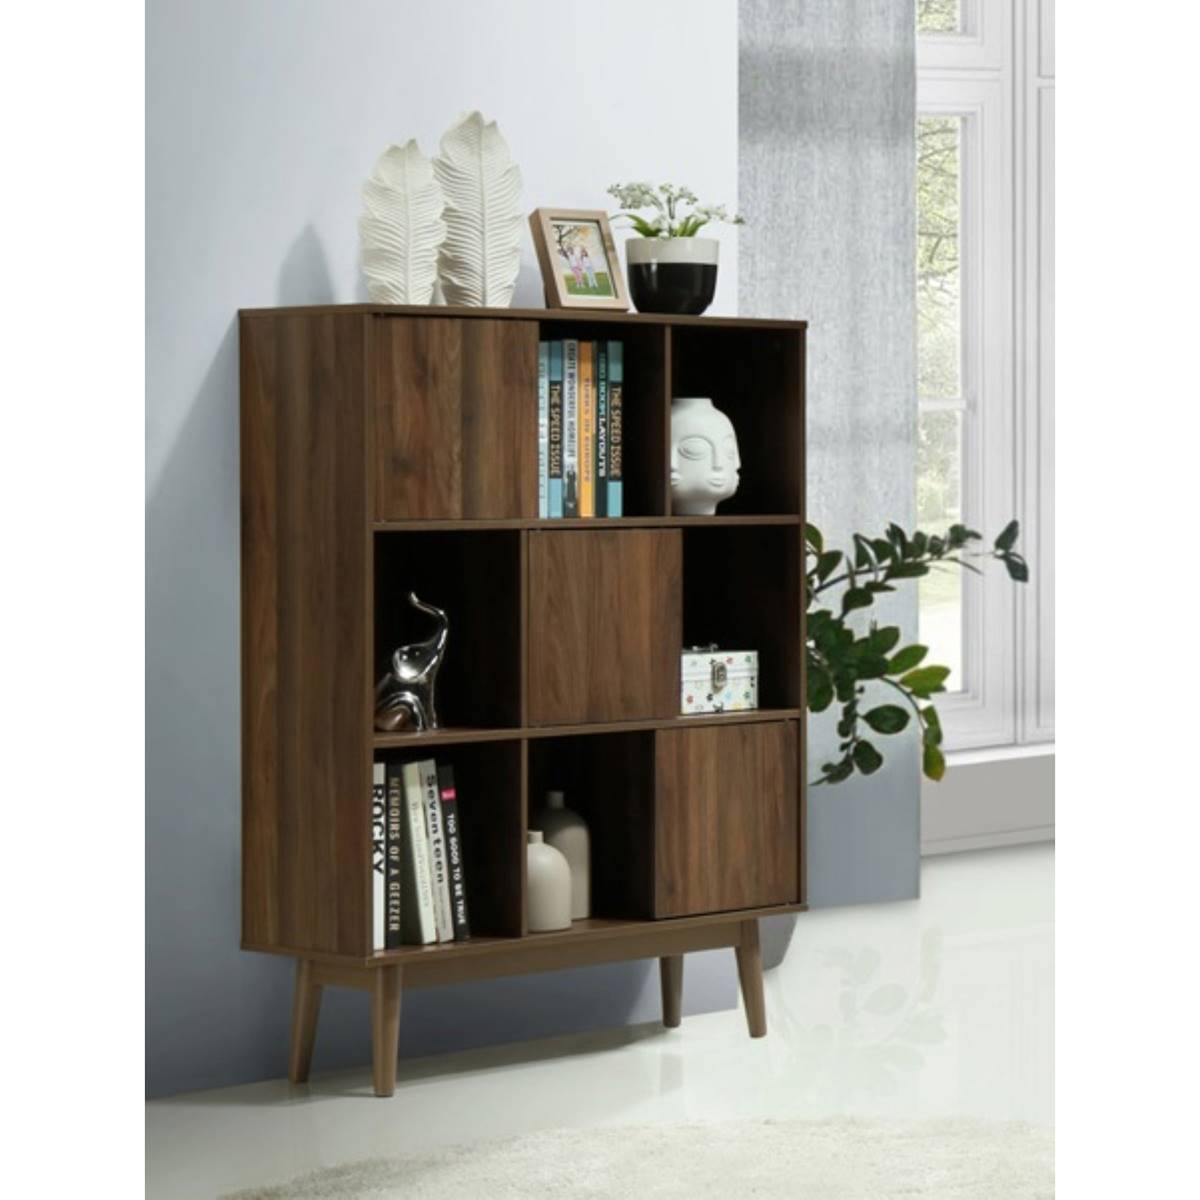 4D Concepts Montage Midcentury Room Bookcase